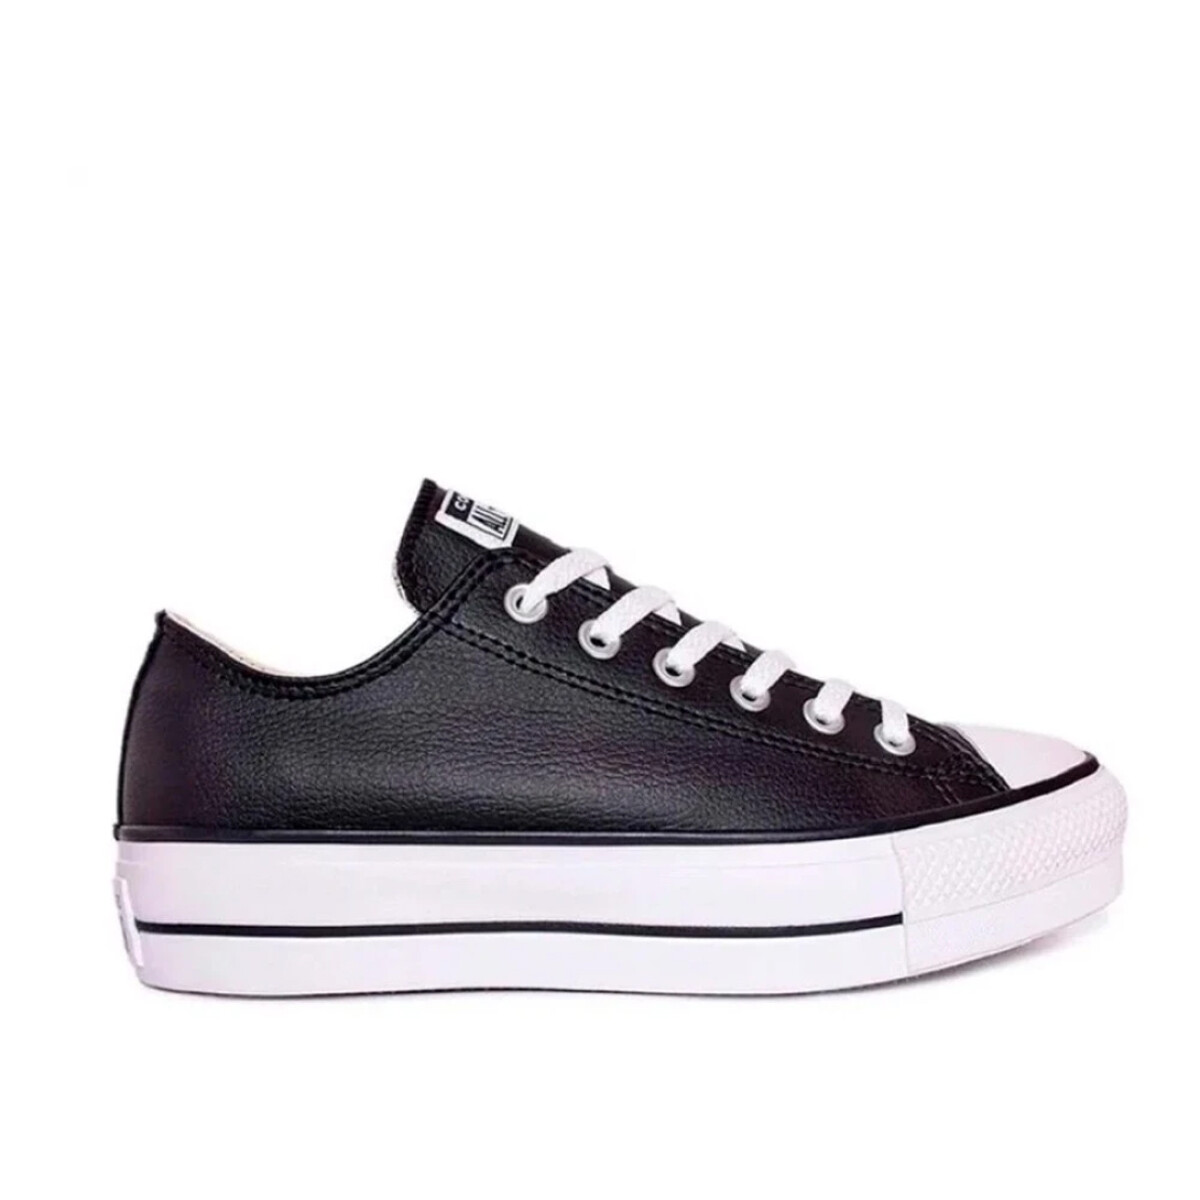 Championes Converse Chuck Taylor As Lift Ox - Negros 